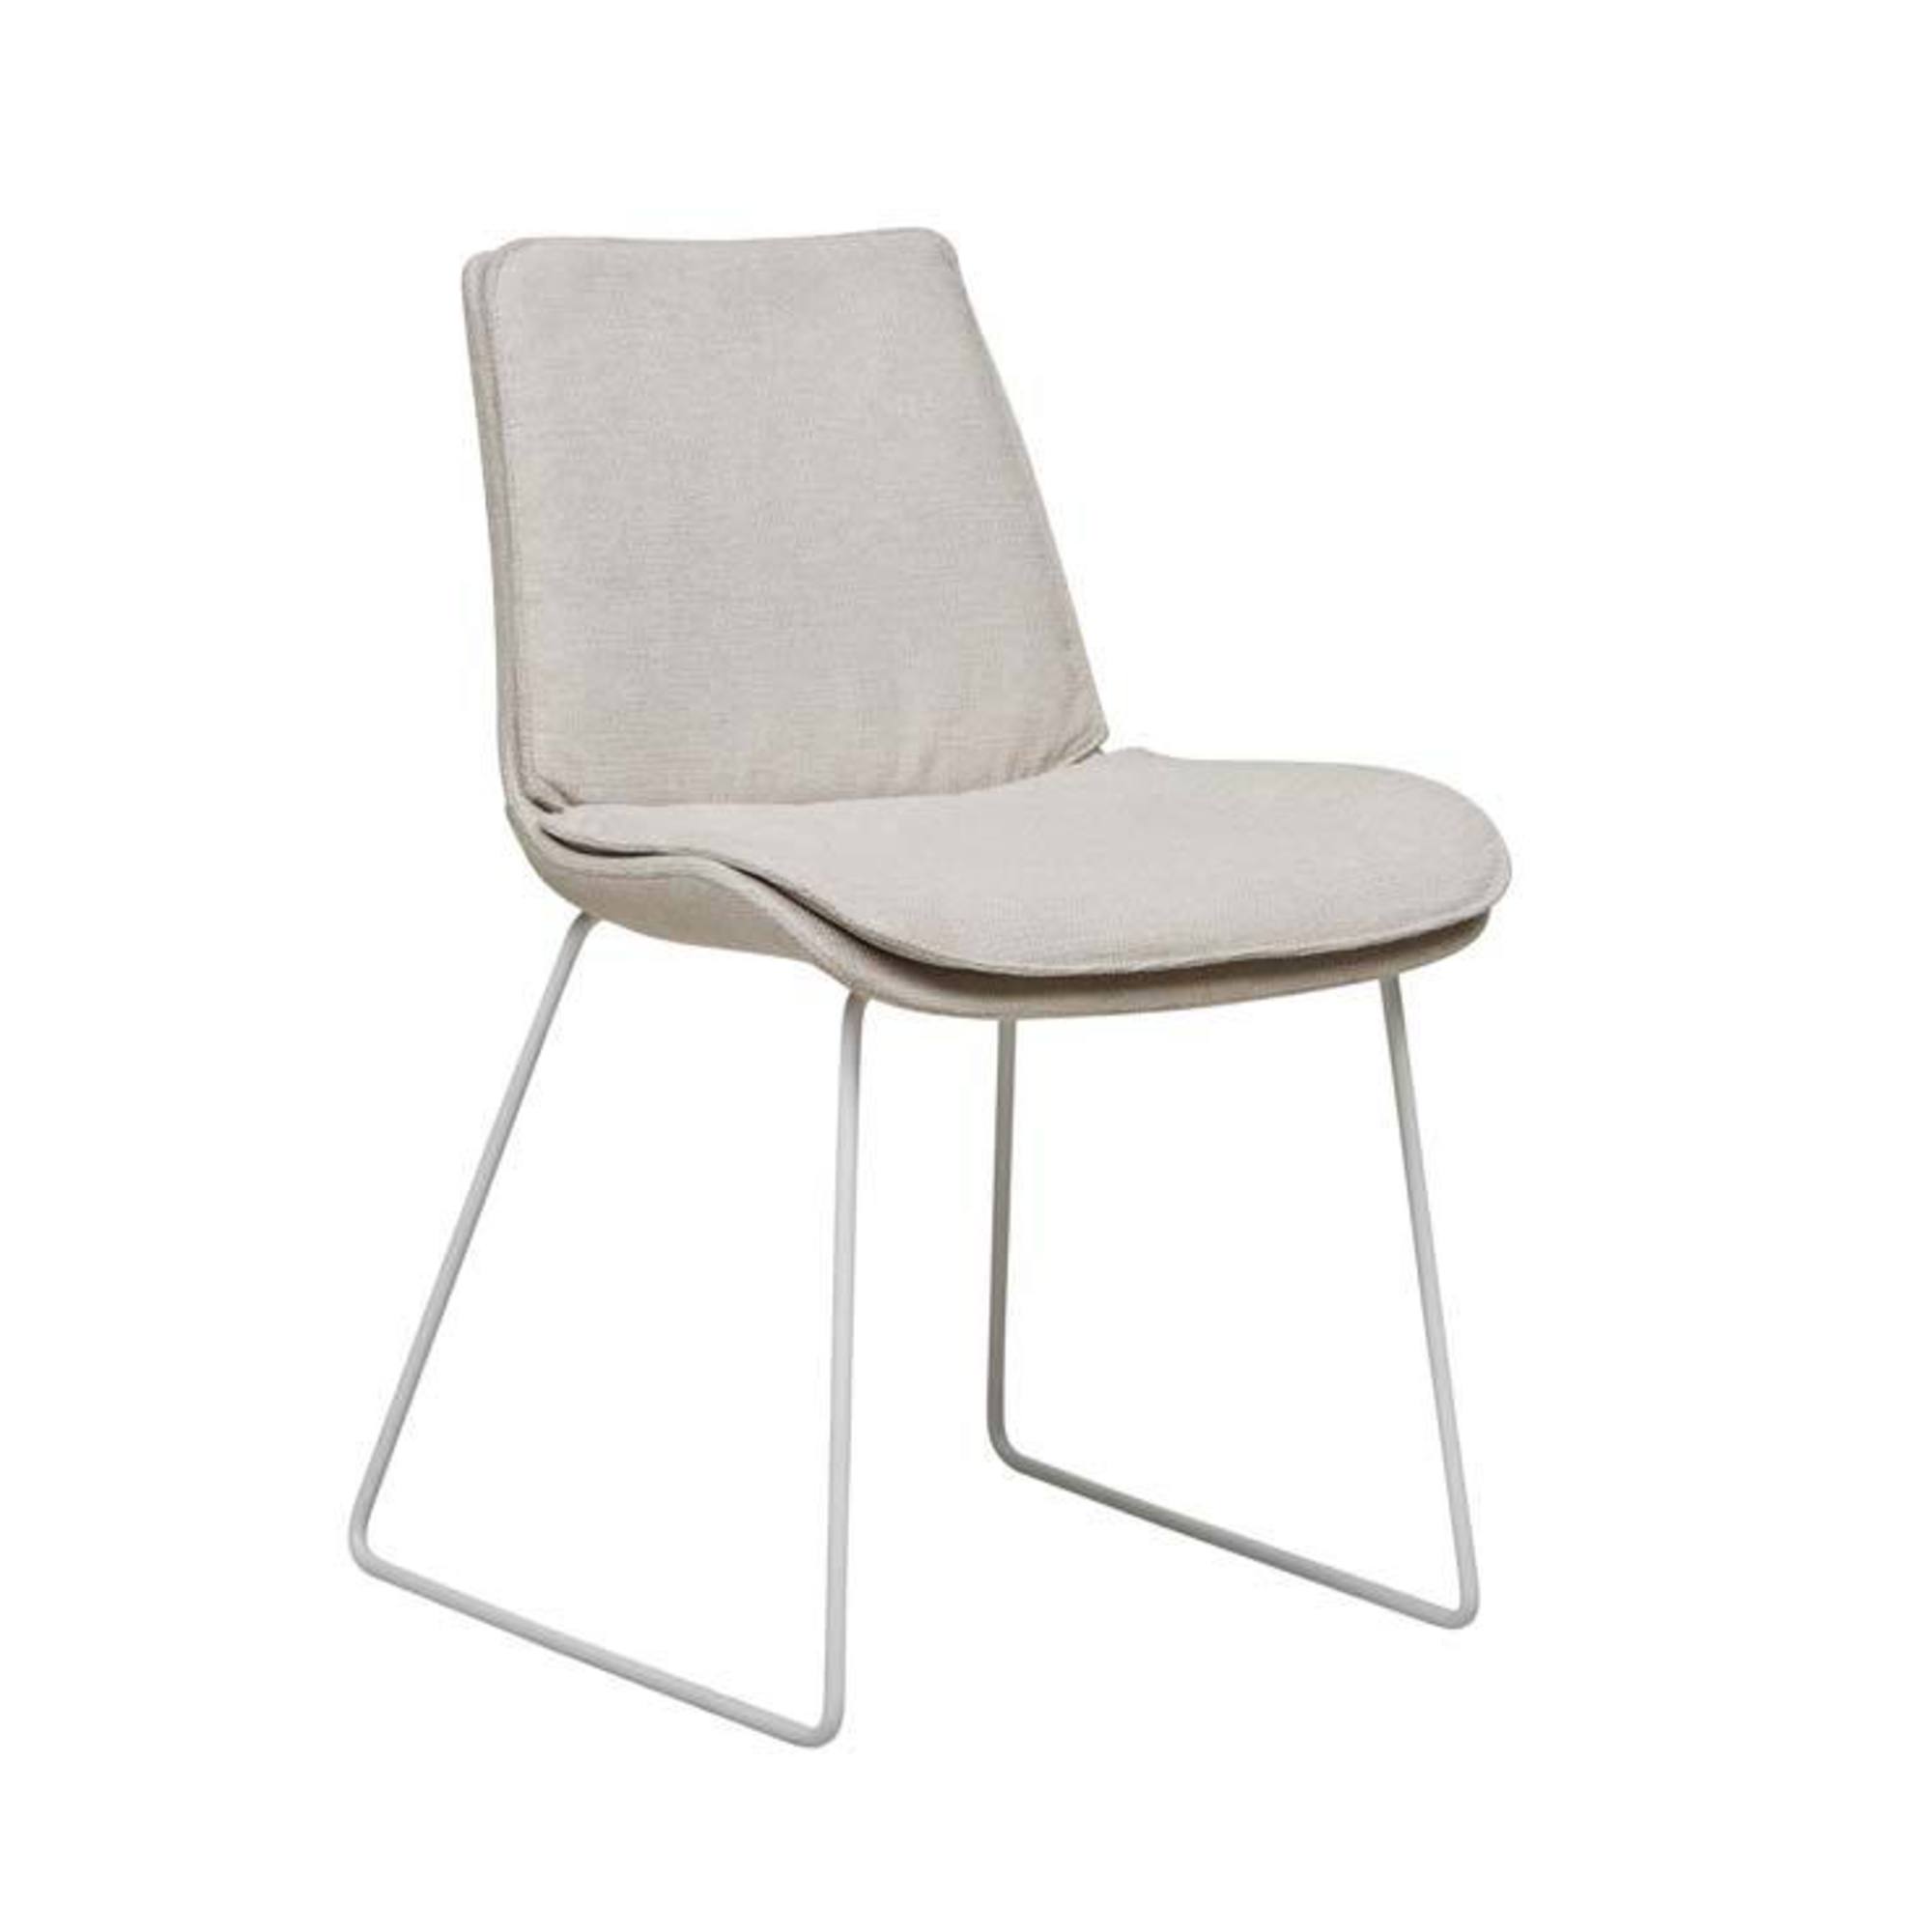 Chase Dining Chair image 22